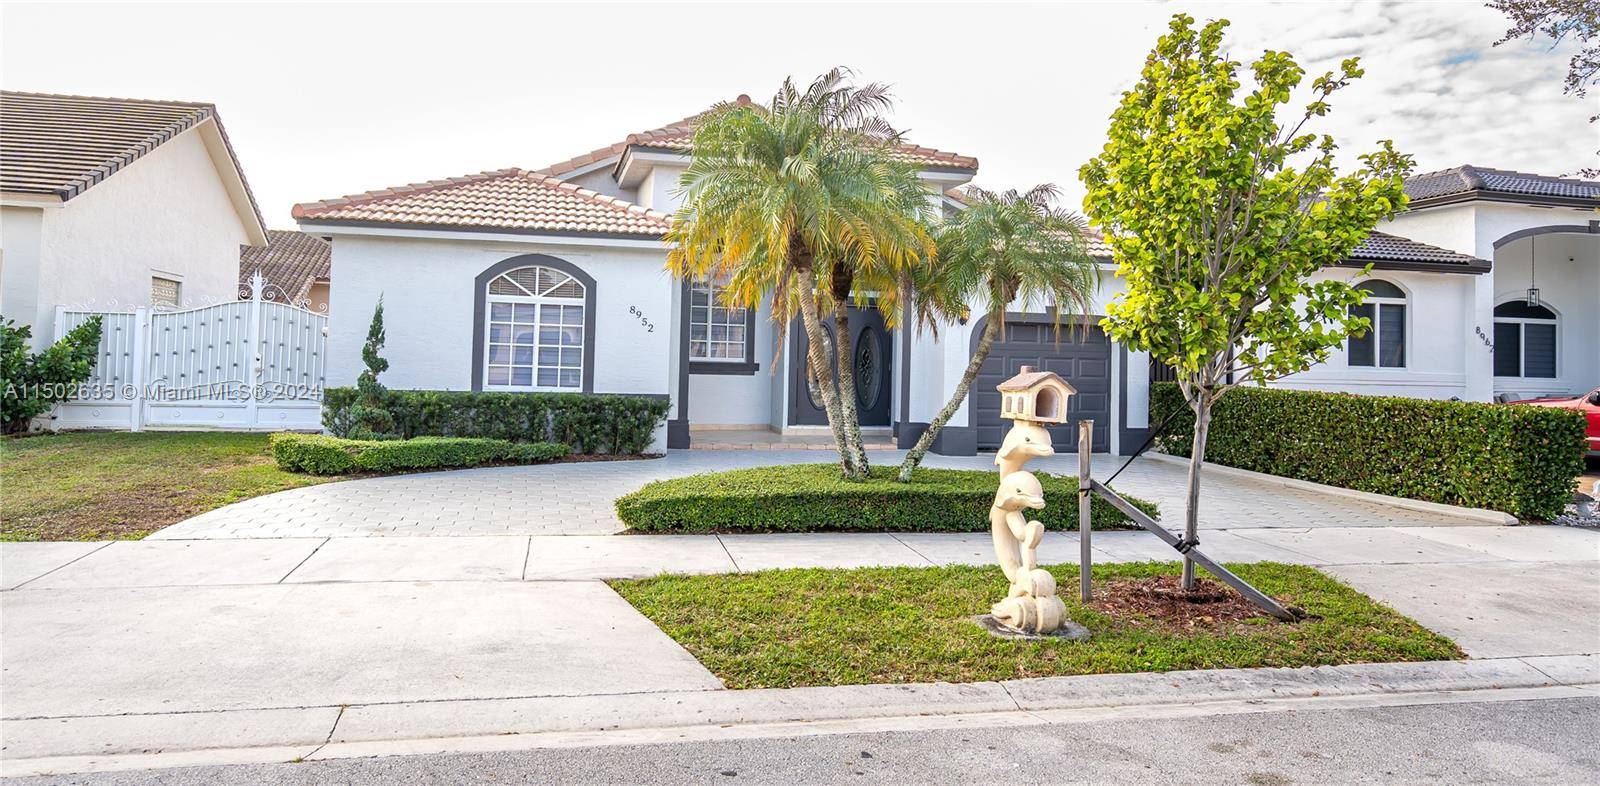 Spacious single family one story home located in the prestigious community of Miami Lakes.